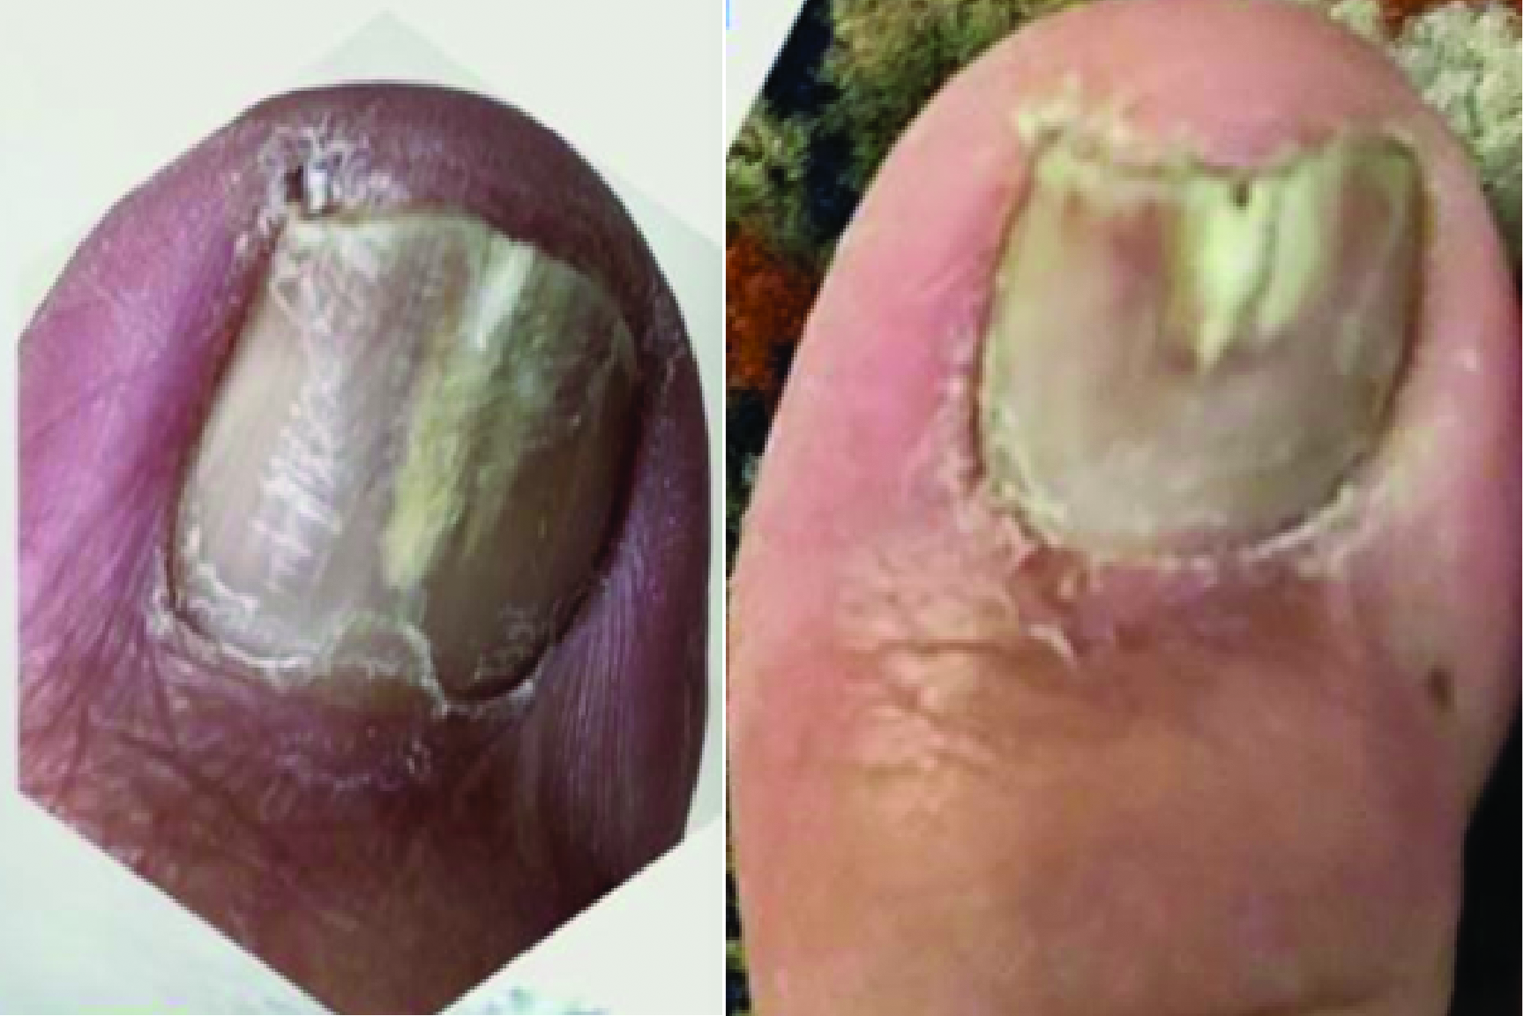 A 60 year old male presented with a clinical diagnosis of onychomycosis of right great toe, which showed no improvement after six months of oral antifungals. He was given 3 monthly sessions of Q switched Nd:YAG laser with 2 to 3 passes at wavelength 1064 nm in nanosecond mode with spot size 6mm and energy 4 J/cm2, followed by 5 passes with spot size 8 mm and energy 2.2 J/cm2. Fractional CO2 laser was then done with 100 micro beams at 30 mJ energy. Follow-up after 3 months from last sessions showed clinical improvement as reduction in the area of involvement.